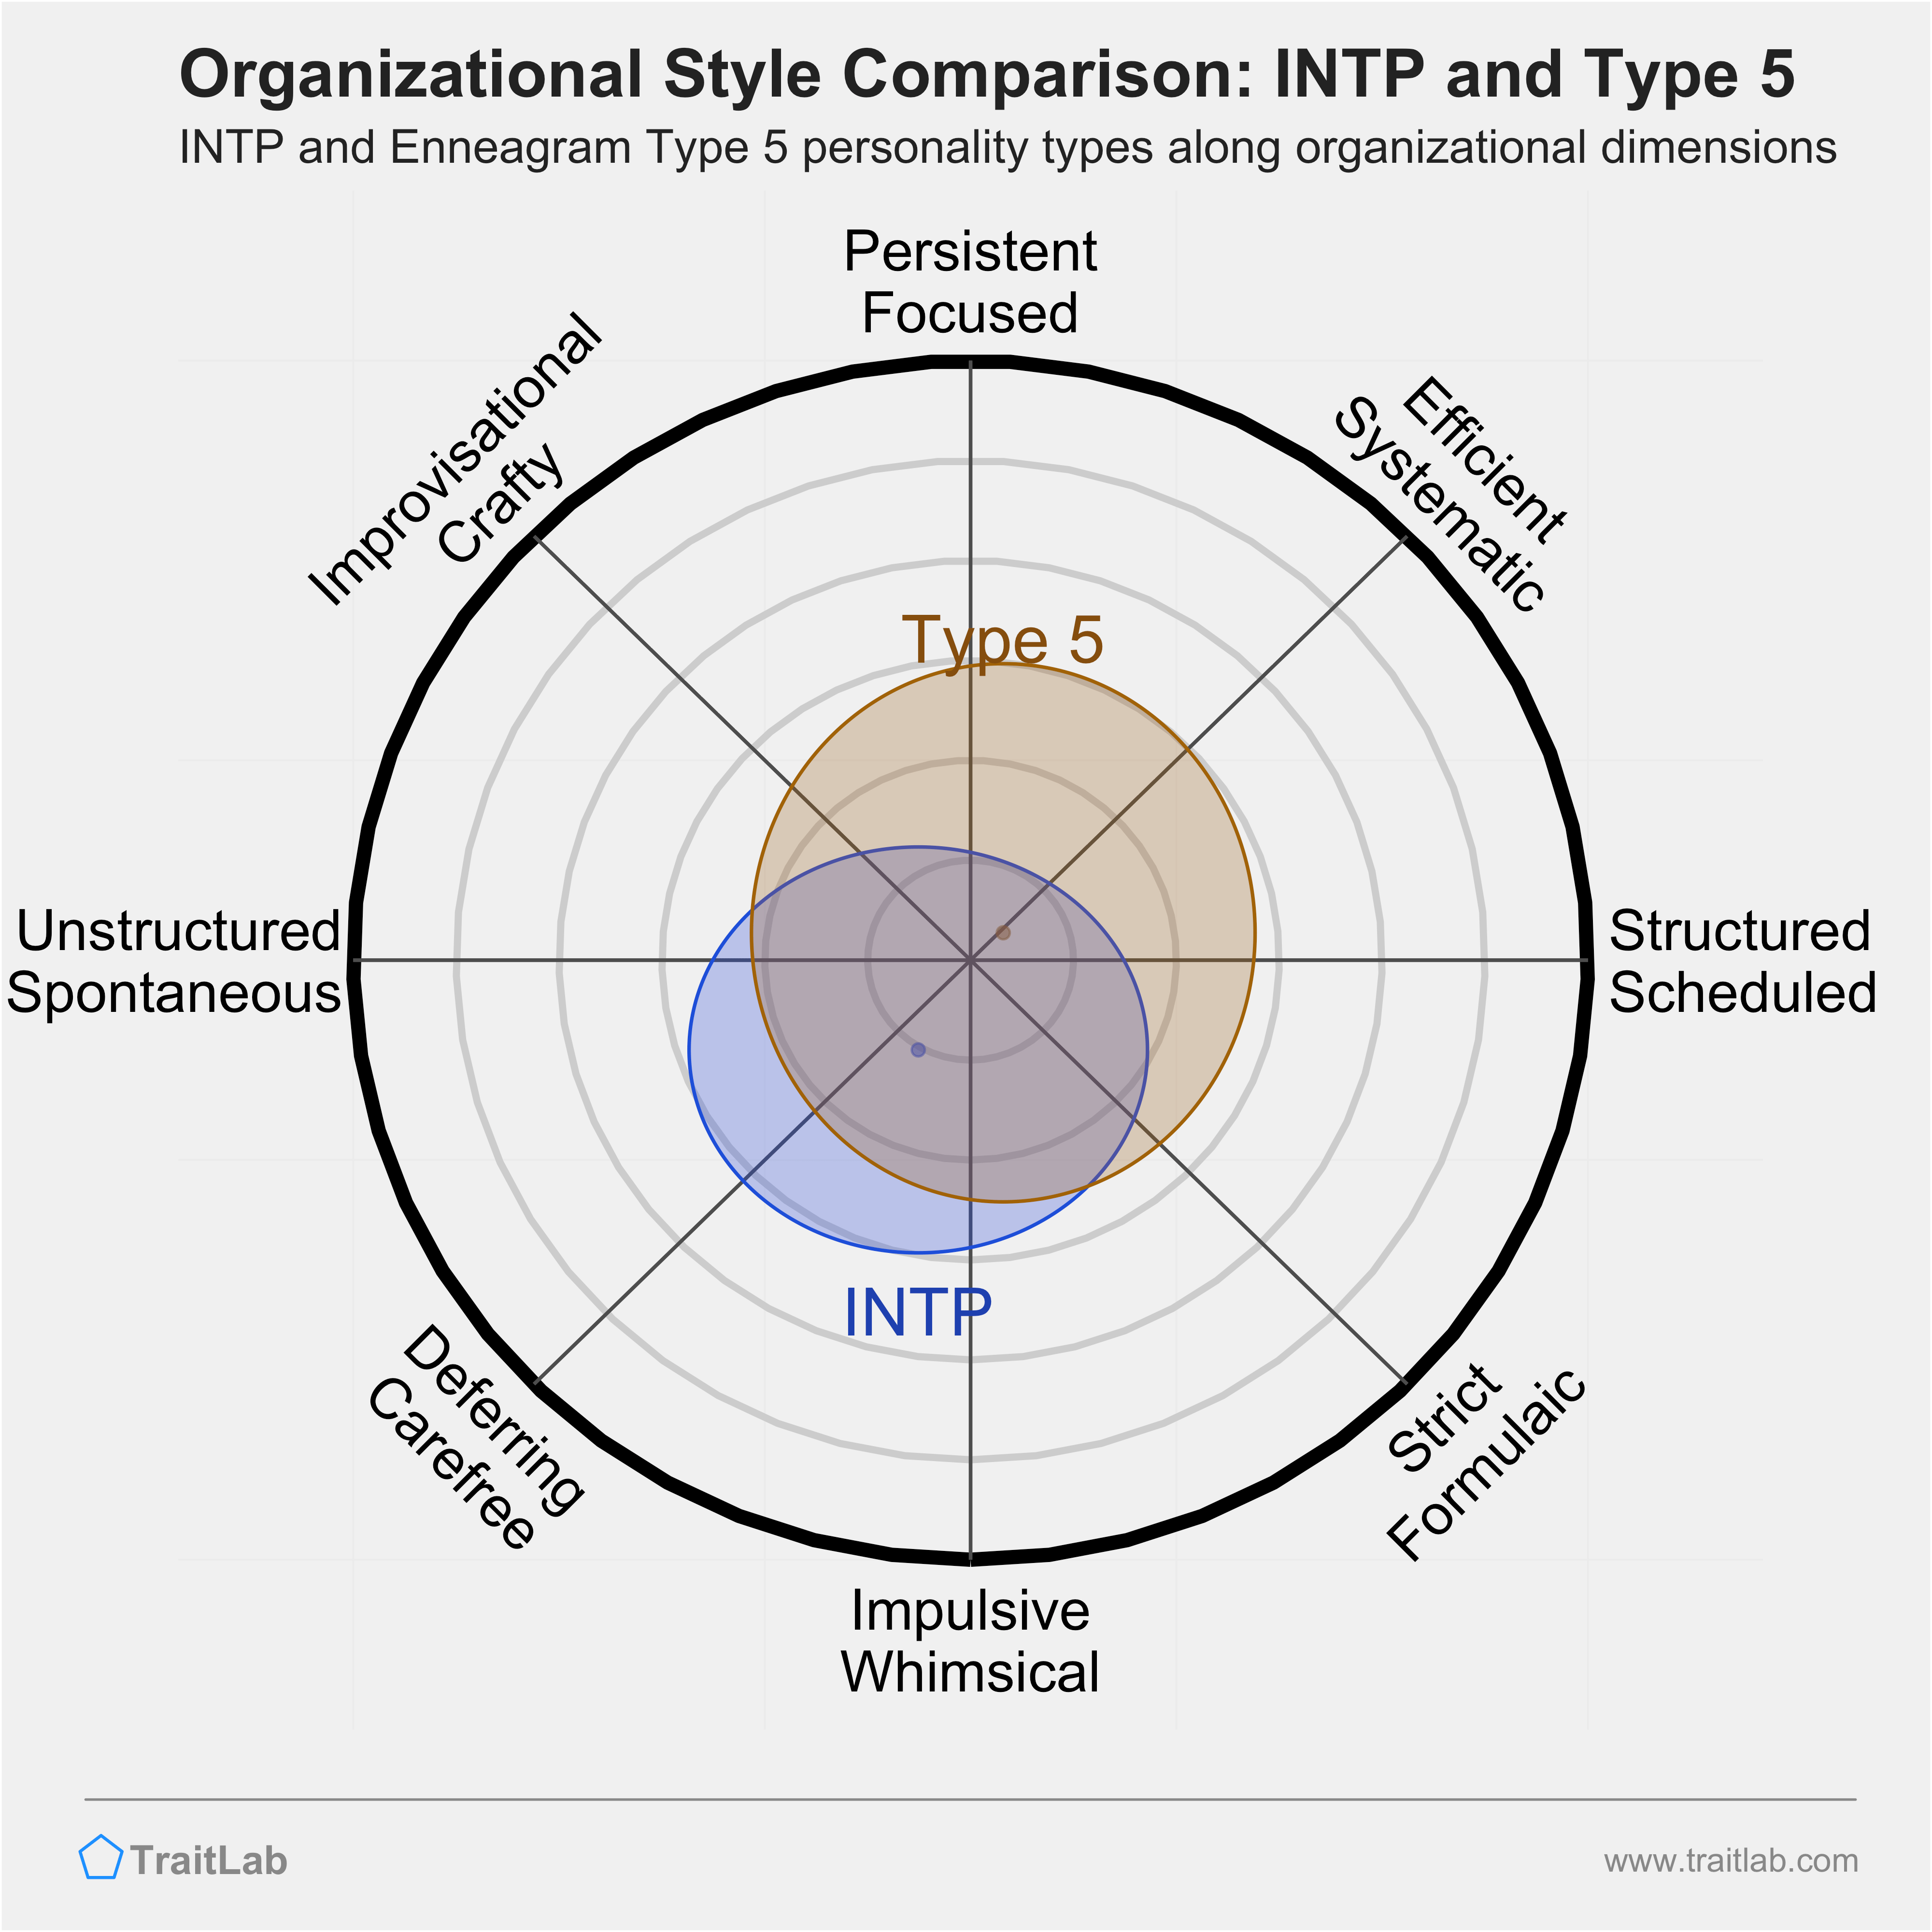 INTP and Type 5 comparison across organizational dimensions